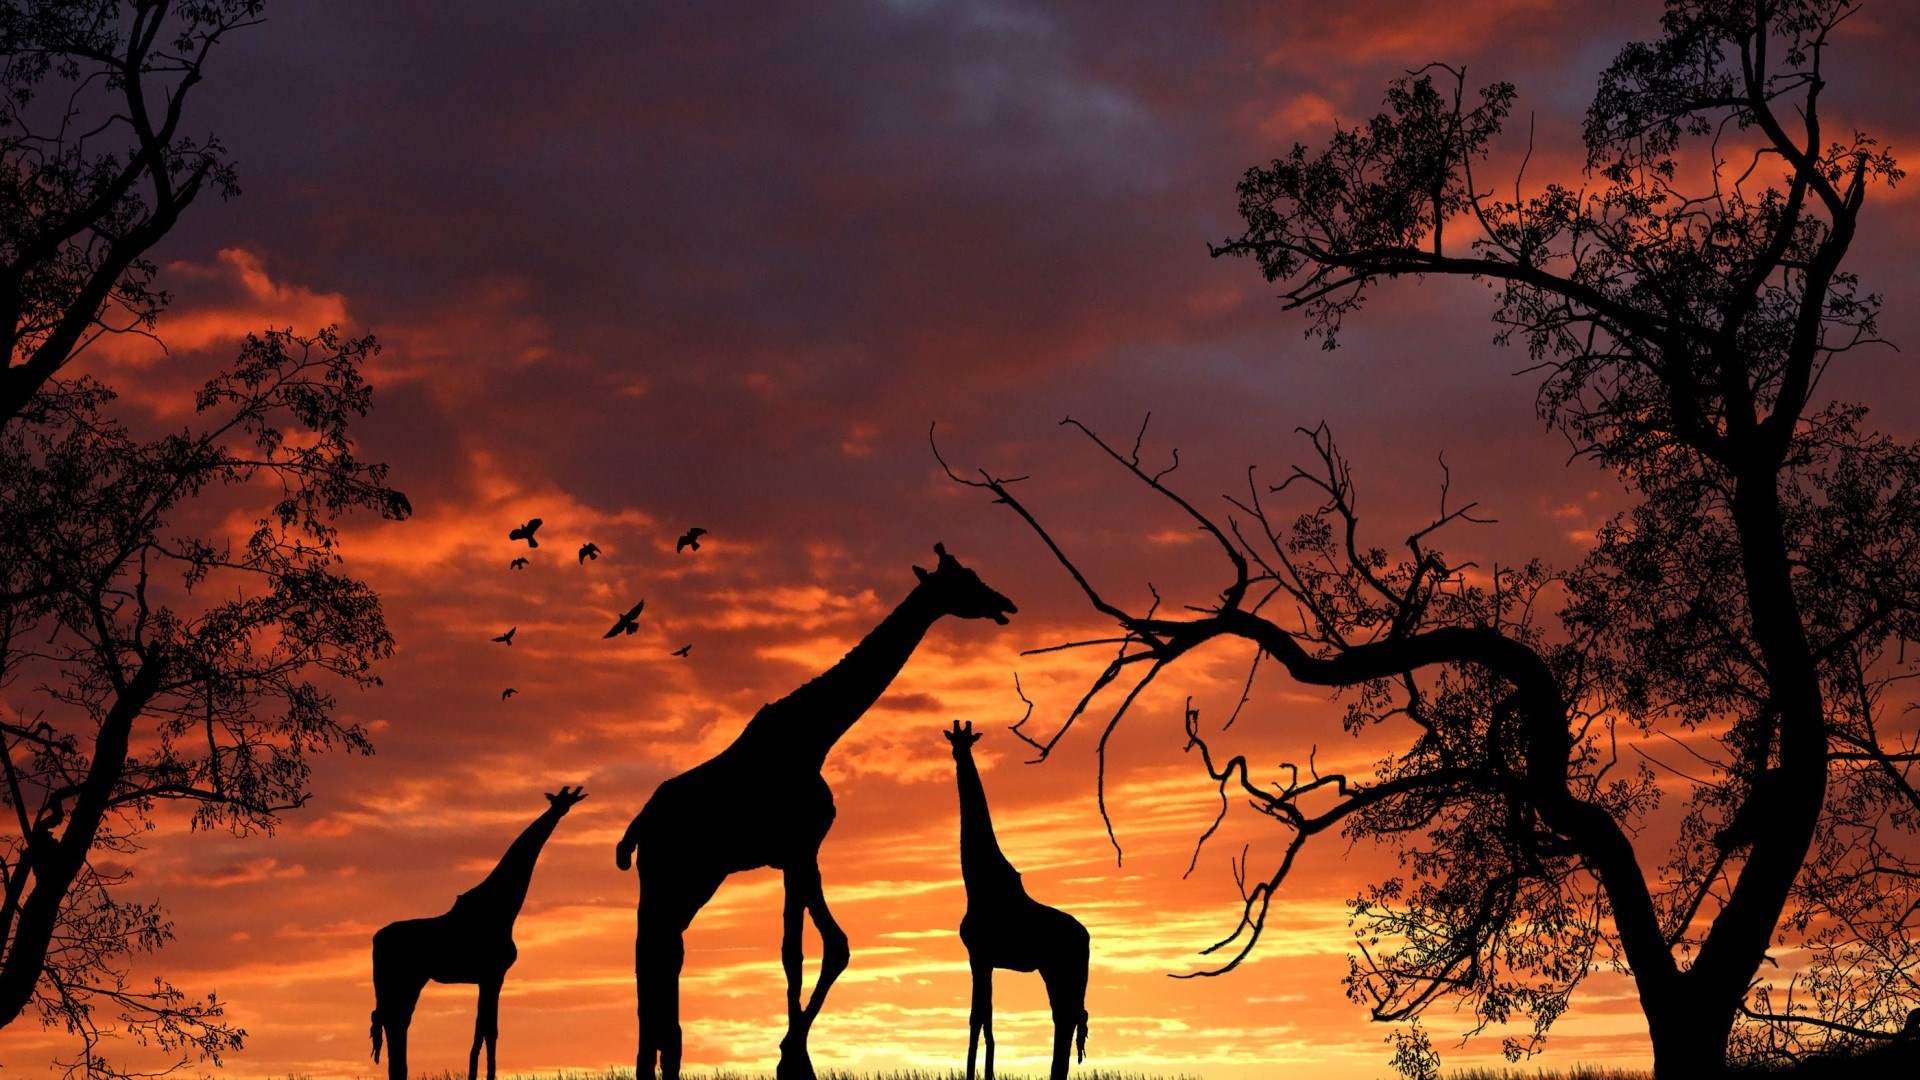 Giraffe: The tallest of living quadrupeds and has a very long neck and a short coat with dark blotches separated by pale lines. 1920x1080 Full HD Wallpaper.